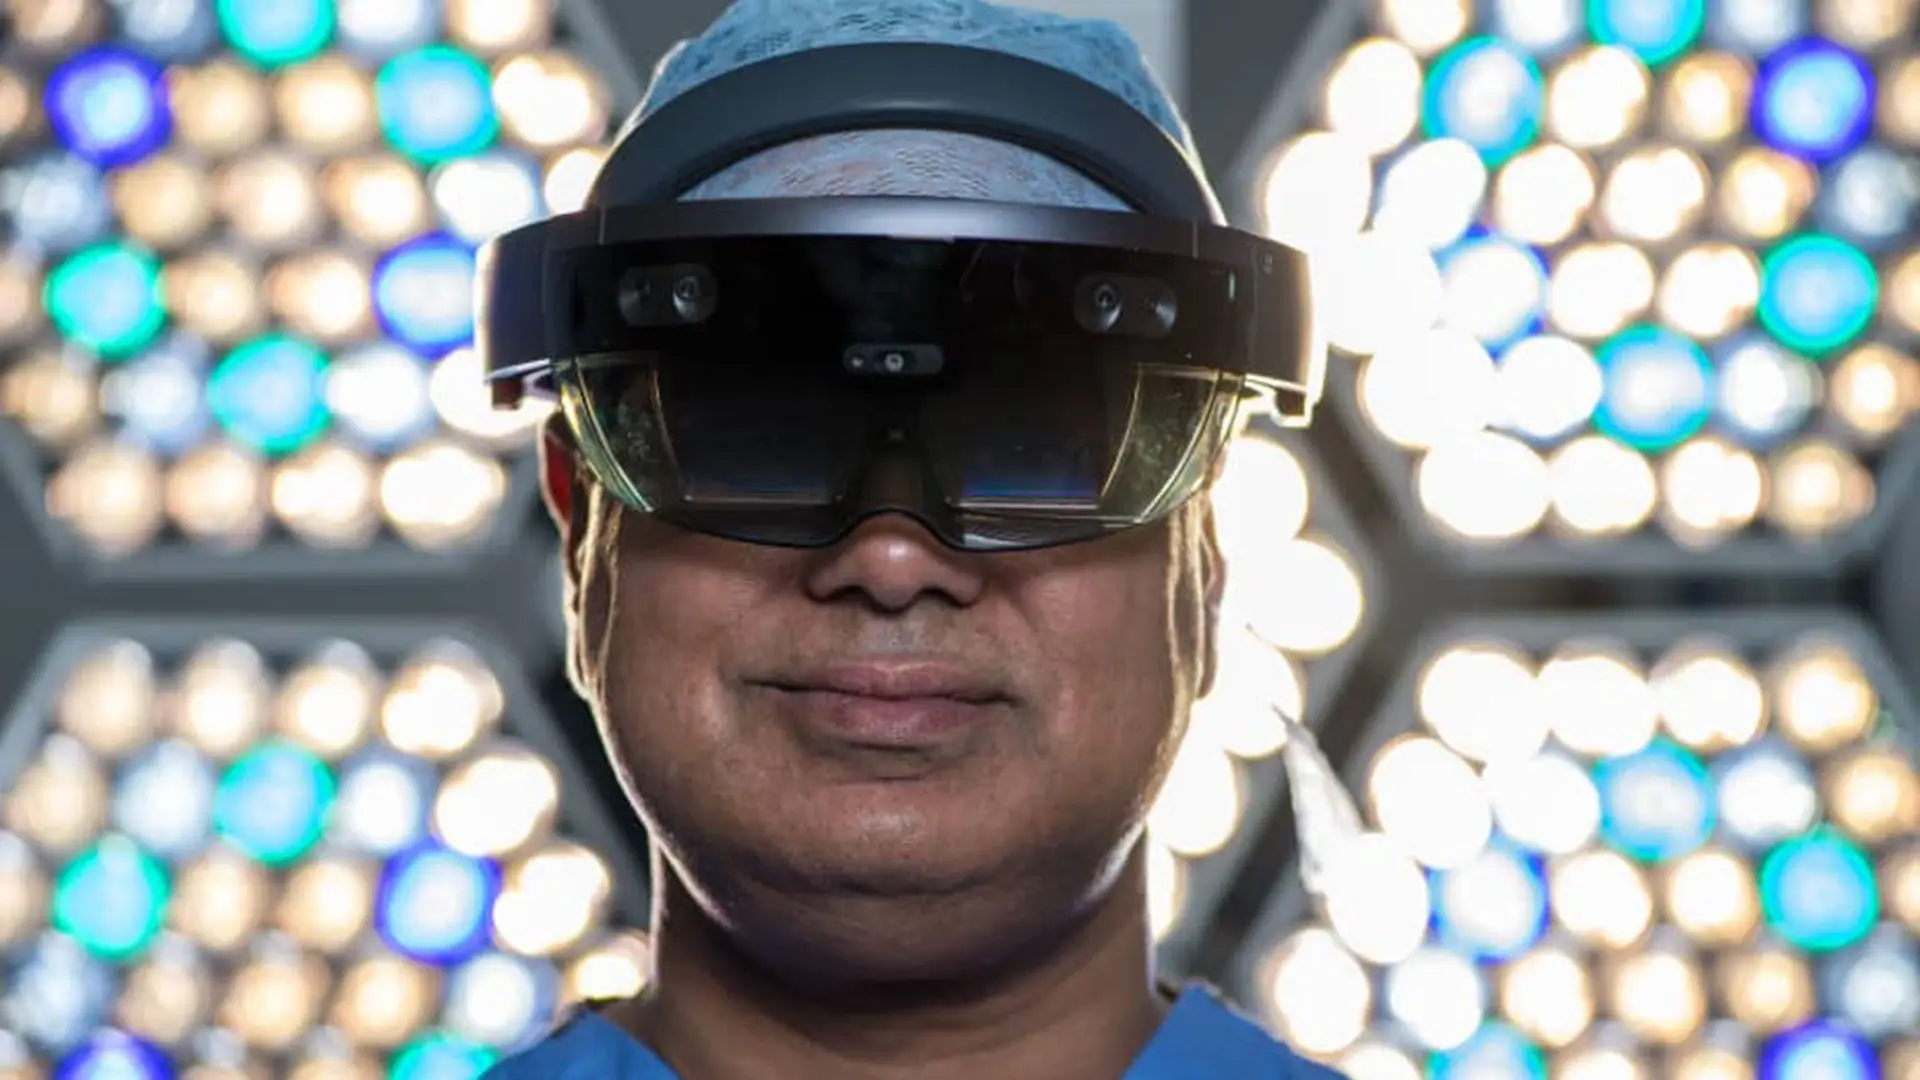 Surgeon Shafi Ahmed poses for a photograph wearing a Microsoft HoloLens headset inside his operating theater at the Royal London Hospital